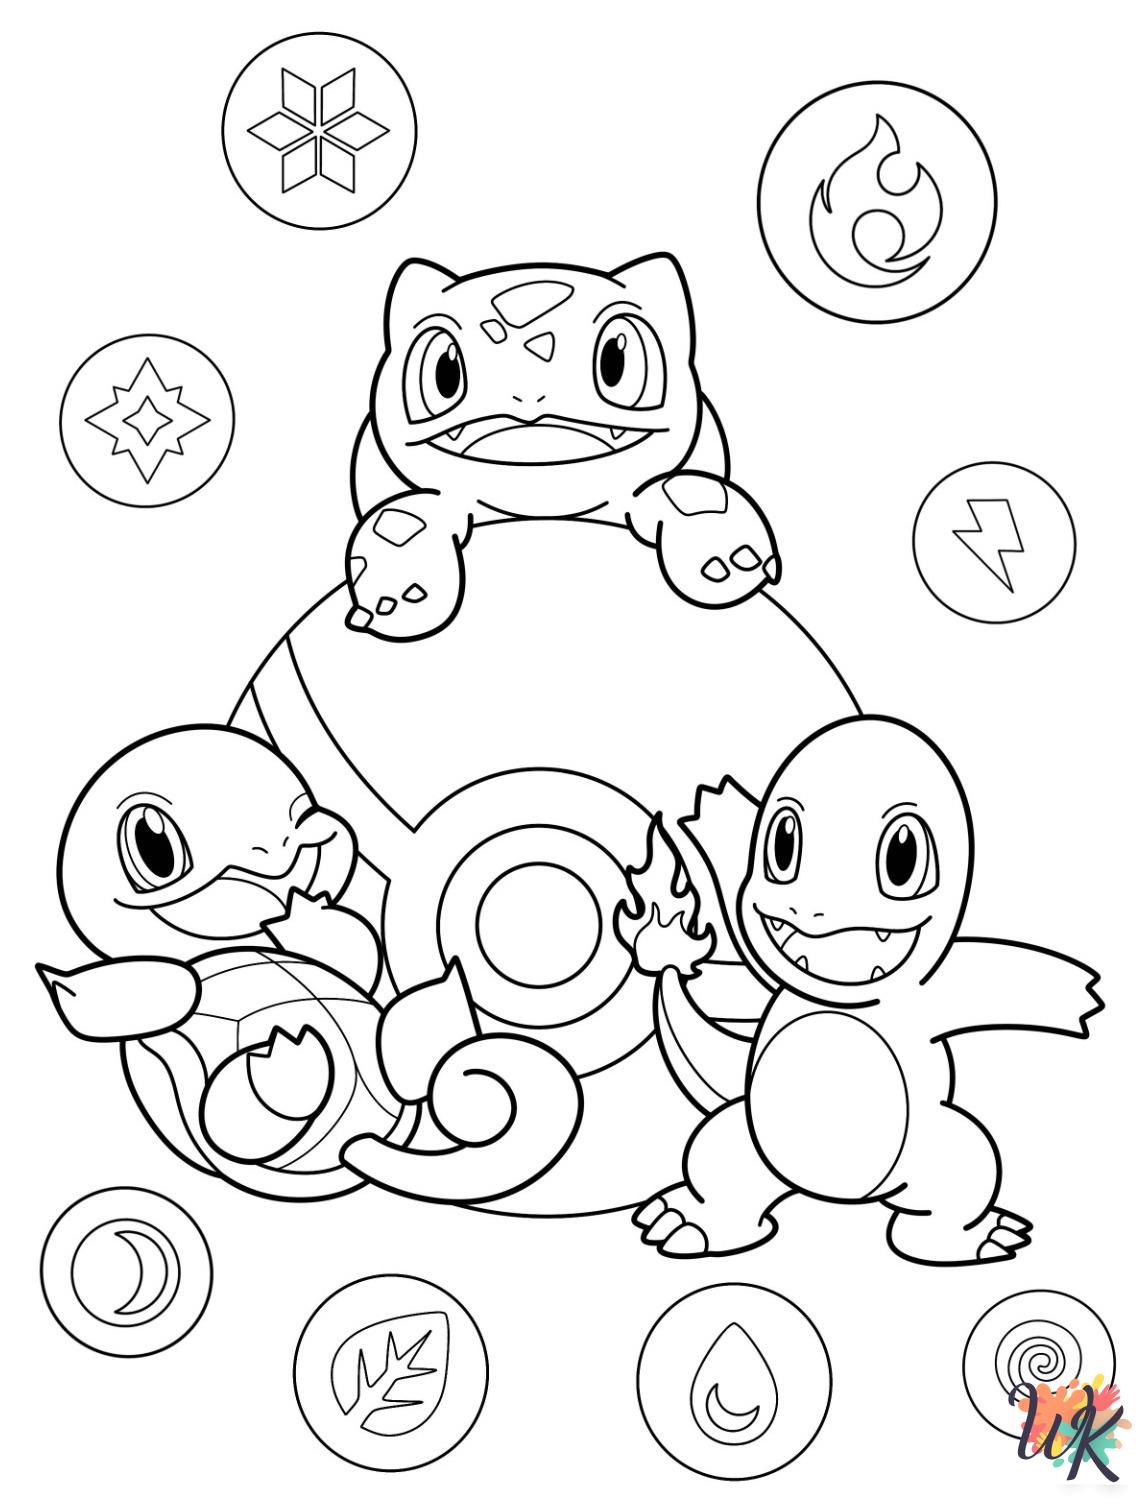 printable Charmander coloring pages for adults